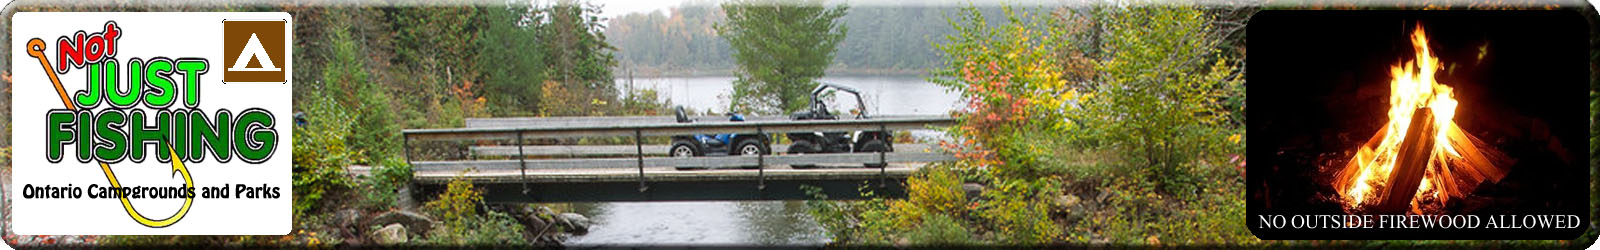 Northern Ontario Campgrounds, Trailer Parks, Ontario Parks, RV Resorts and Lodges